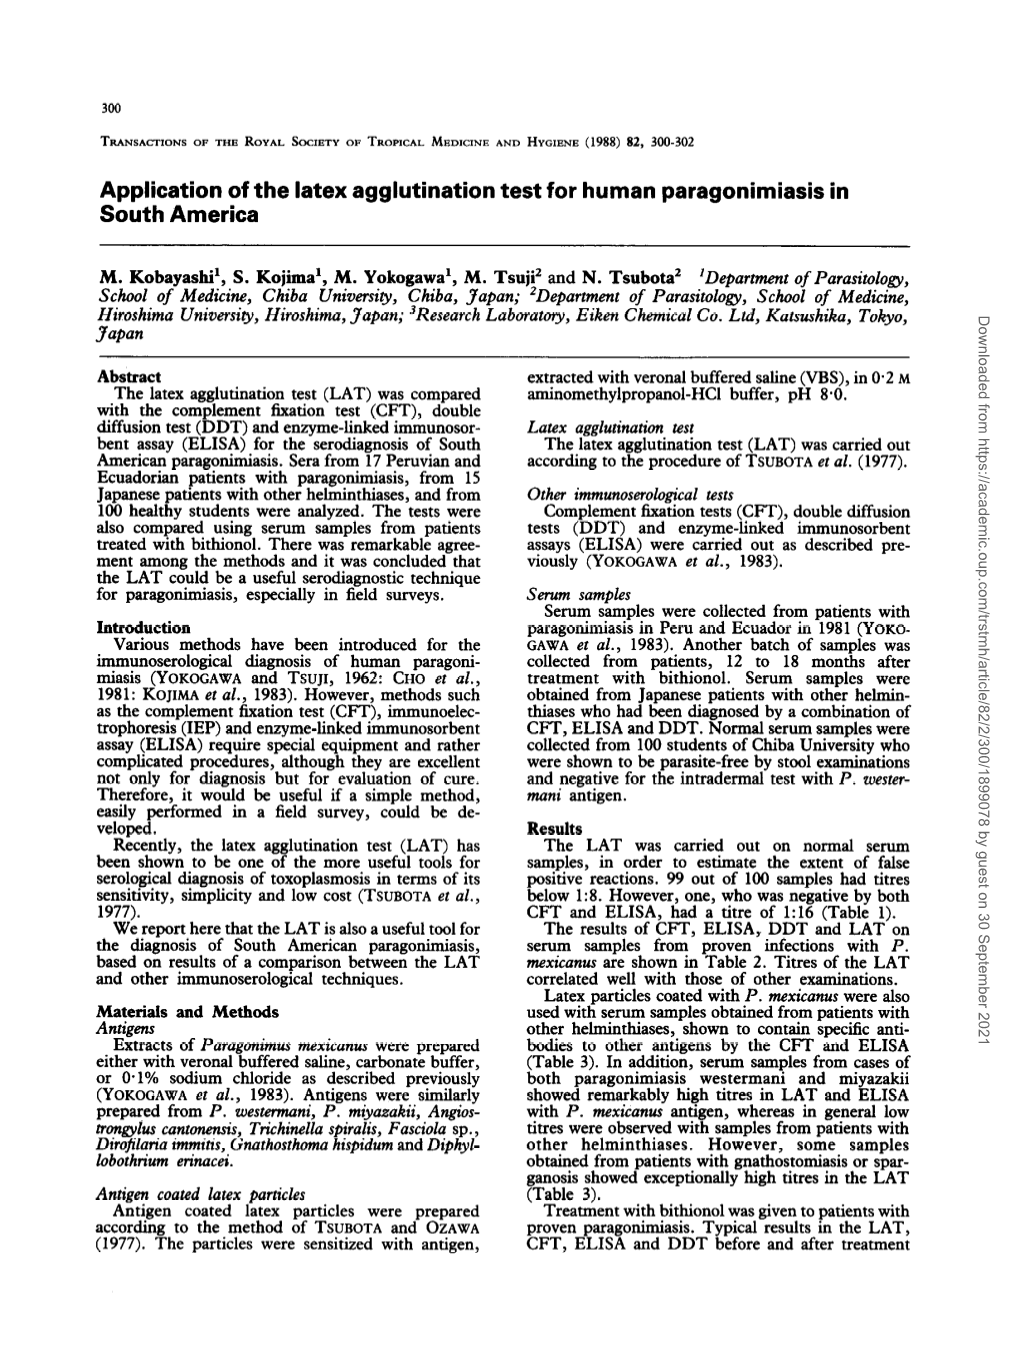 Application of the Latex Agglutination Test for Human Paragonimiasis in South America